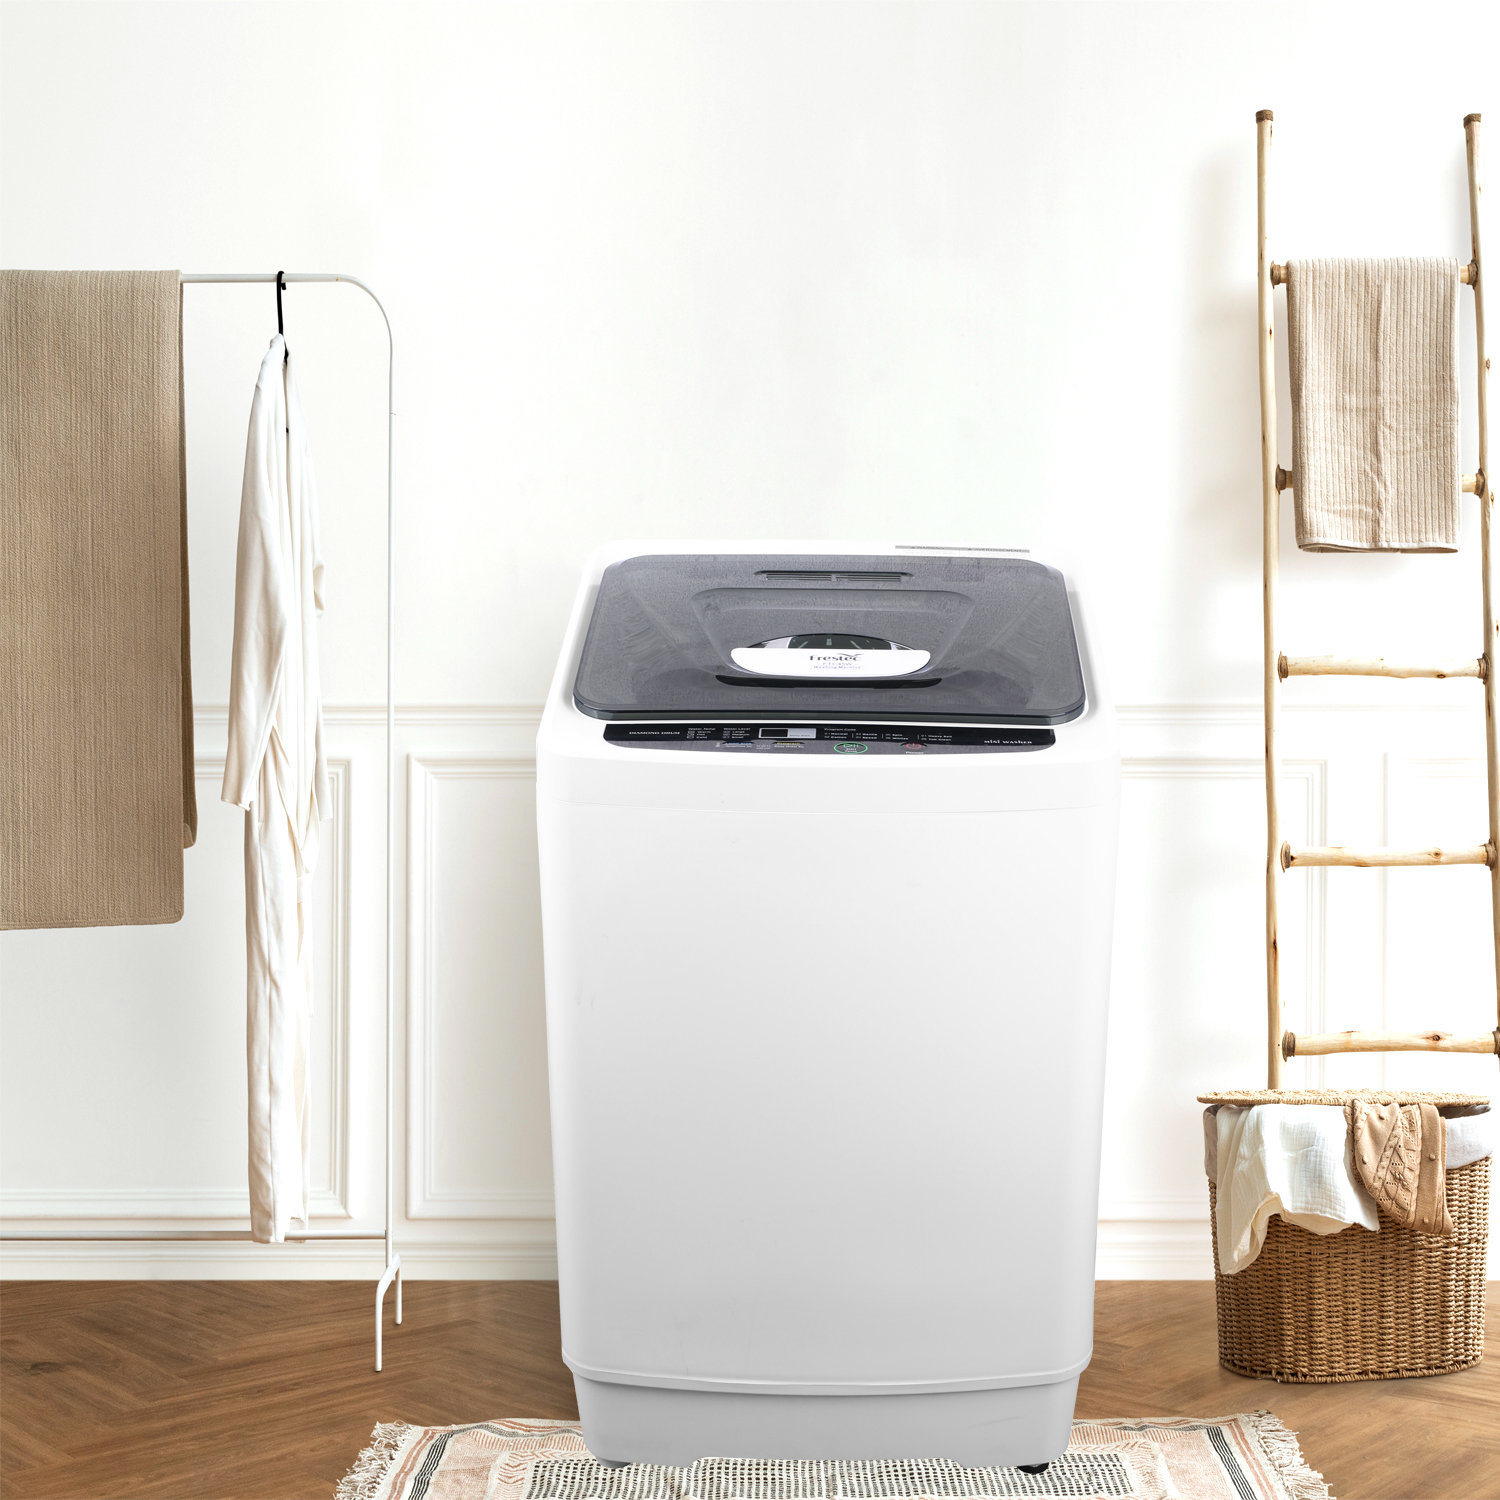 Frestec 1.38 Cubic Feet cu. ft. Portable Washer in White with Child Safety  Lock